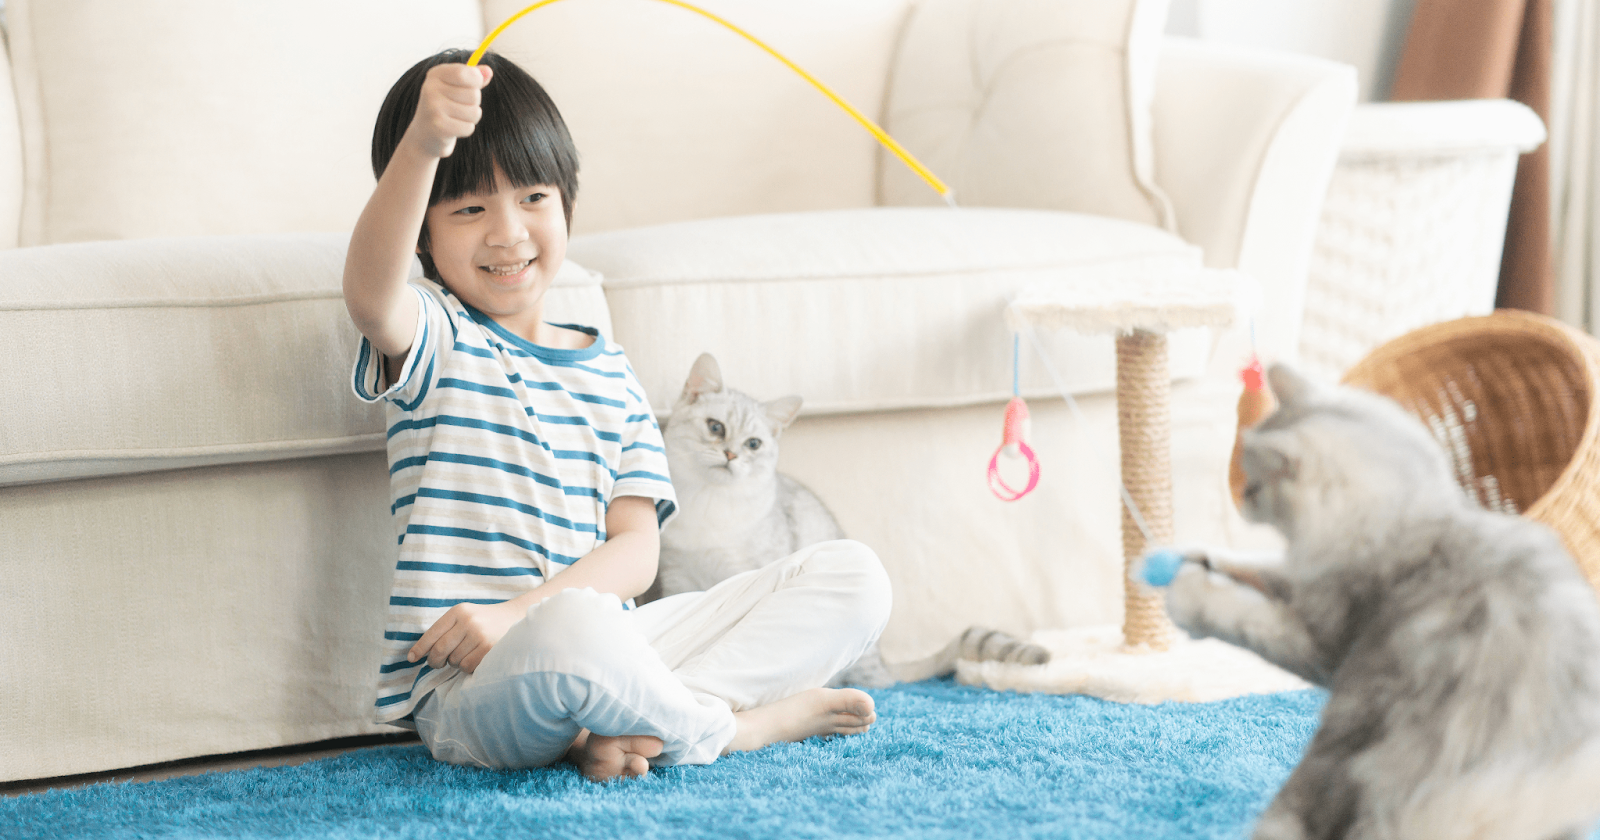 Young boy playing with two cats using string toy